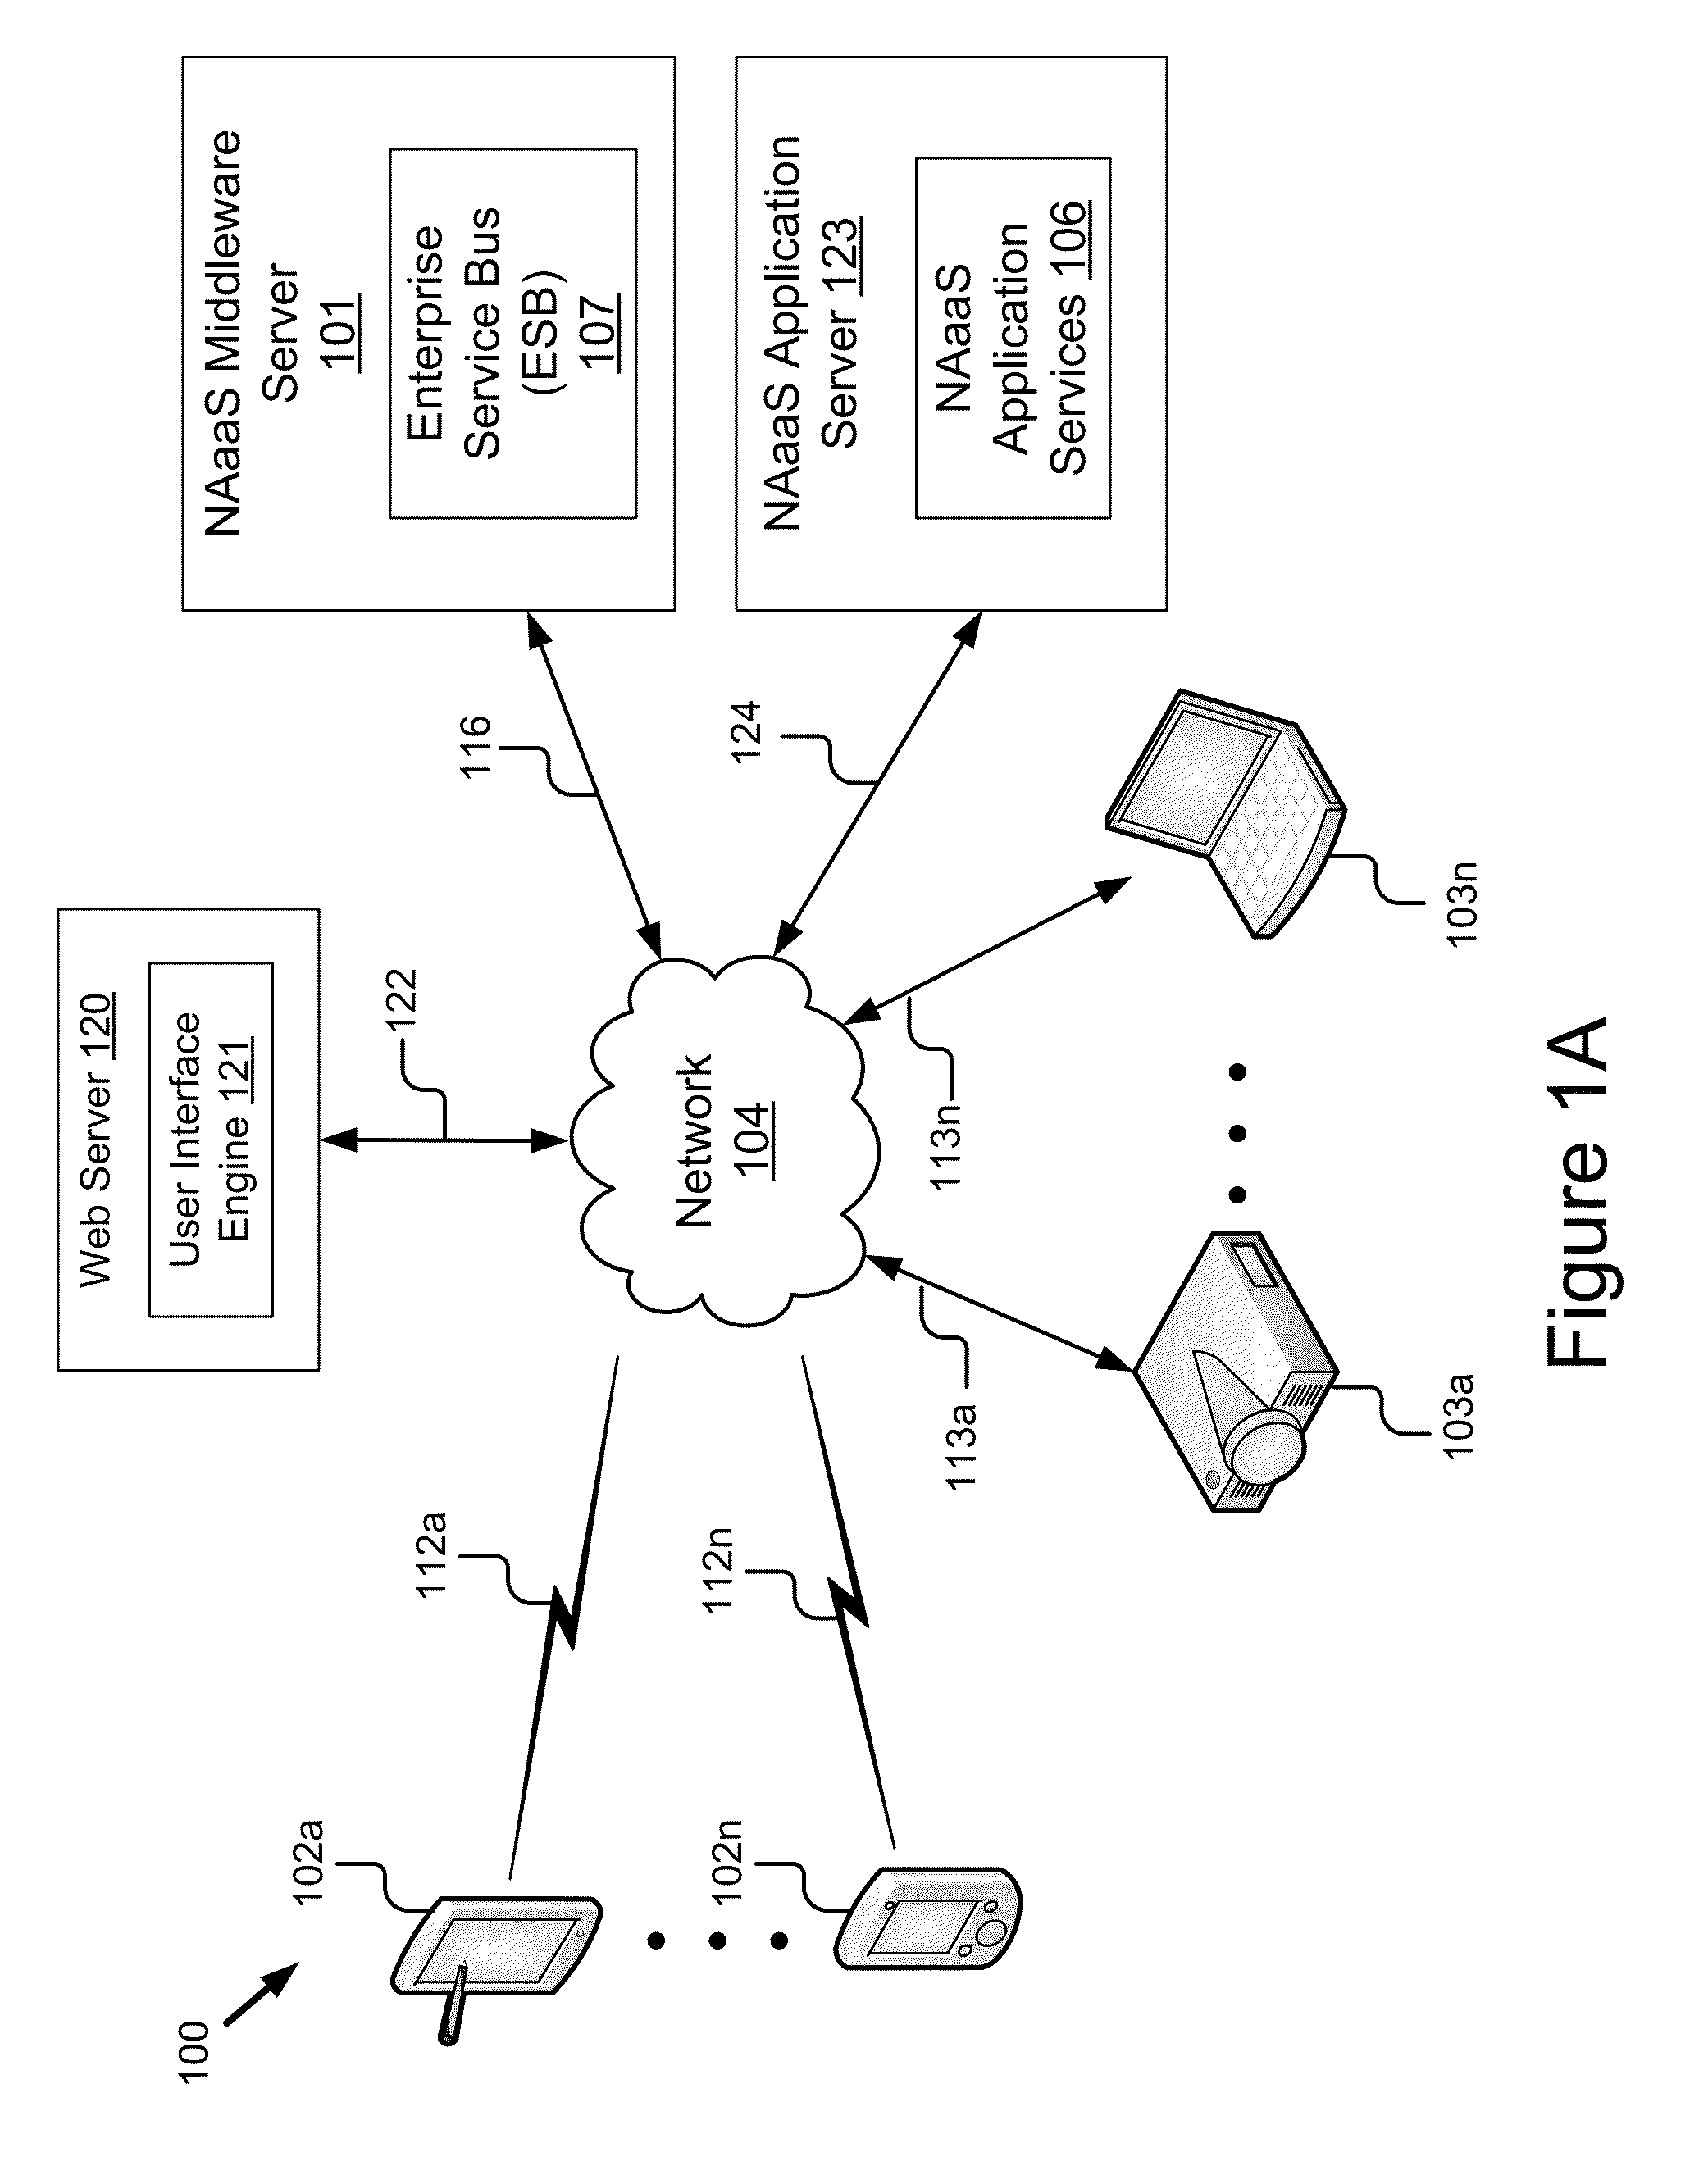 Network Appliance Architecture for Unified Communication Services